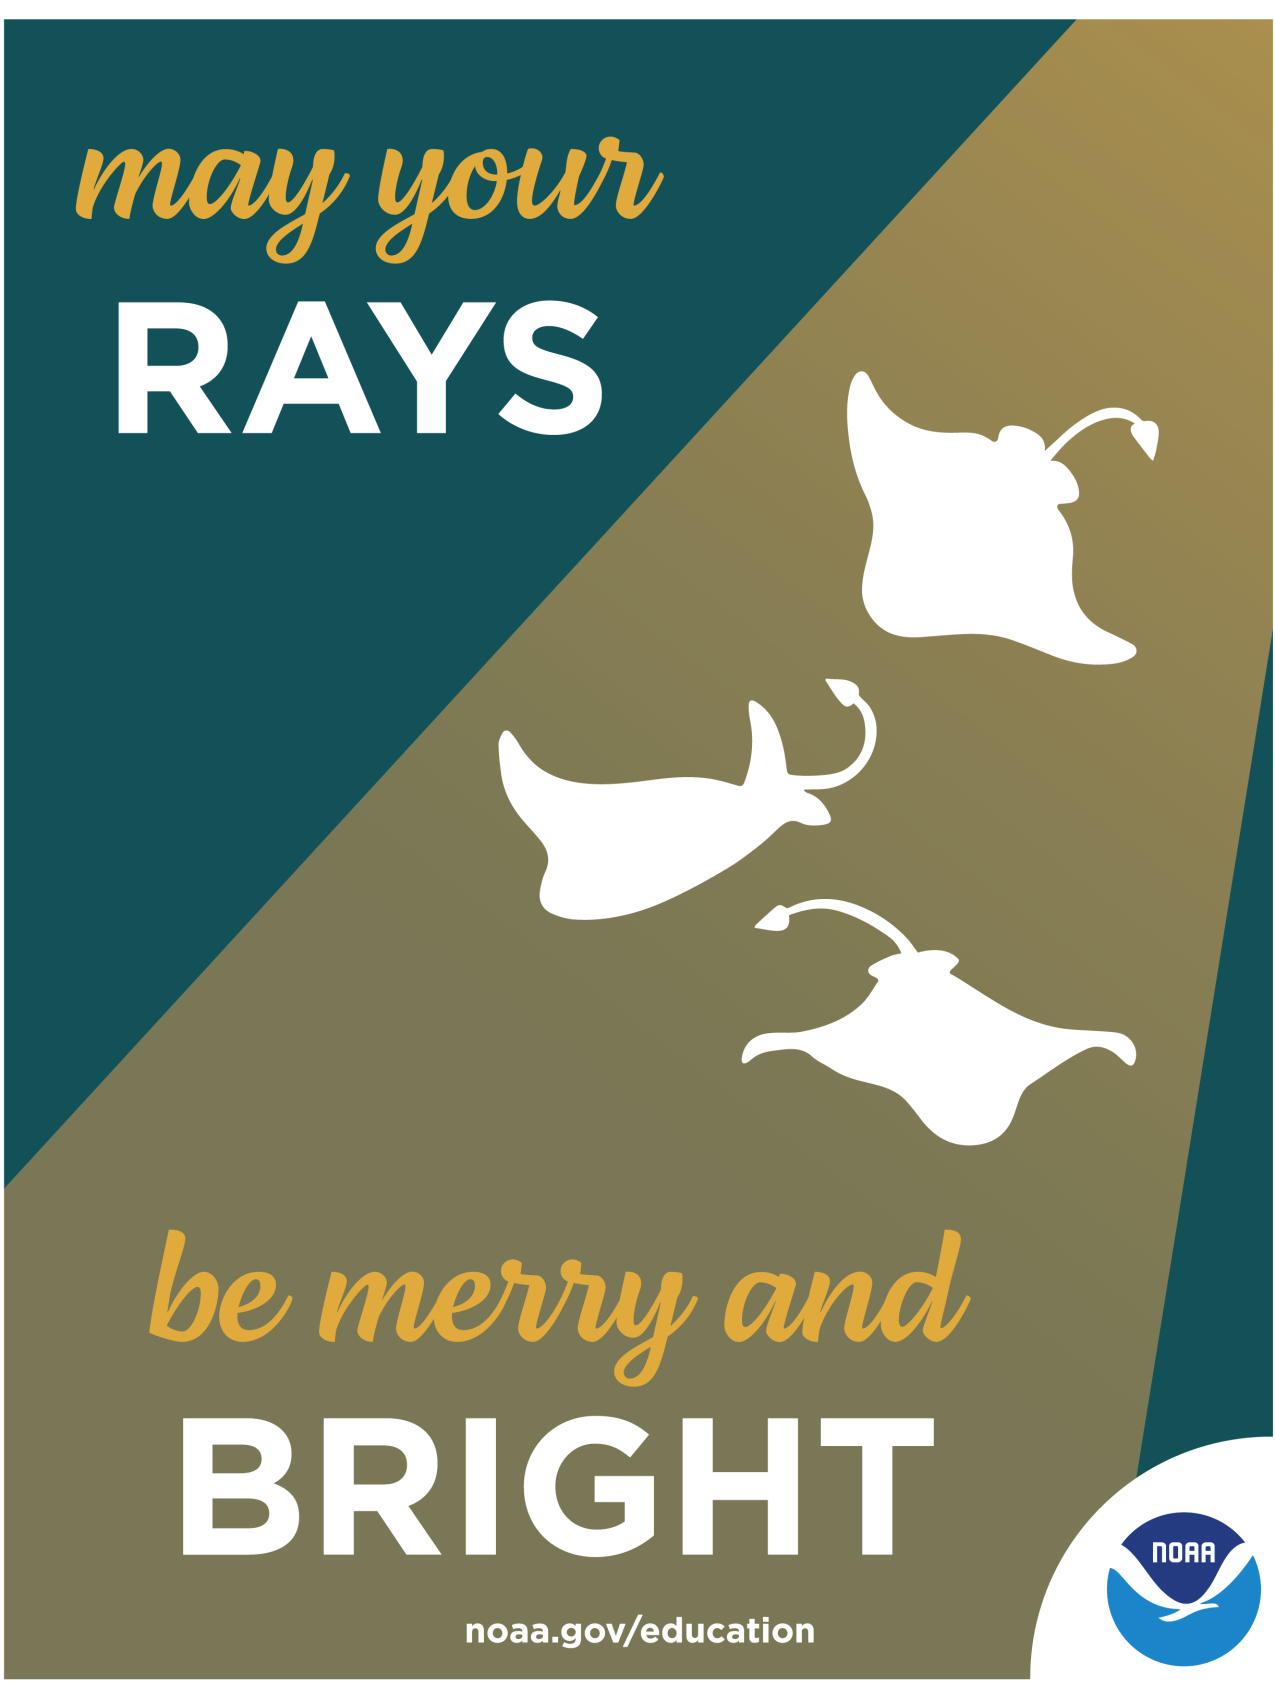 An illustrated holiday card featuring three stingrays swimming in a column of light. There is a NOAA logo in the corner of the card. Text: May your rays be merry and bright! noaa.gov/education